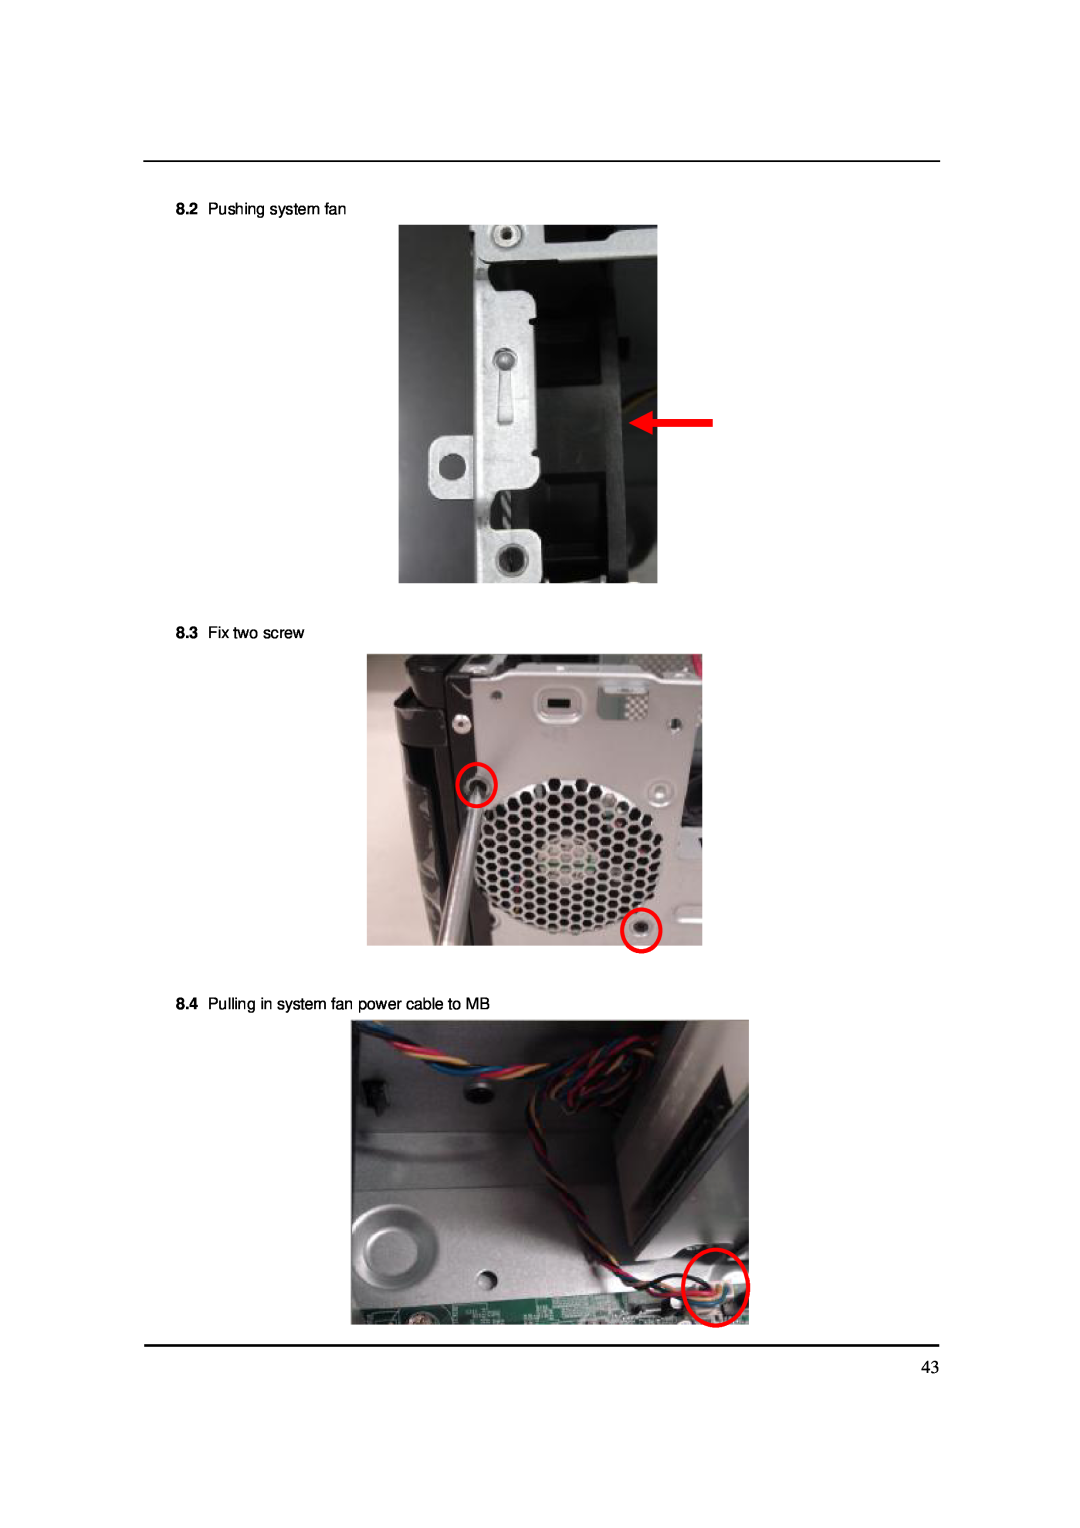 Acer S3811 manual Pushing system fan 8.3 Fix two screw, Pulling in system fan power cable to MB 